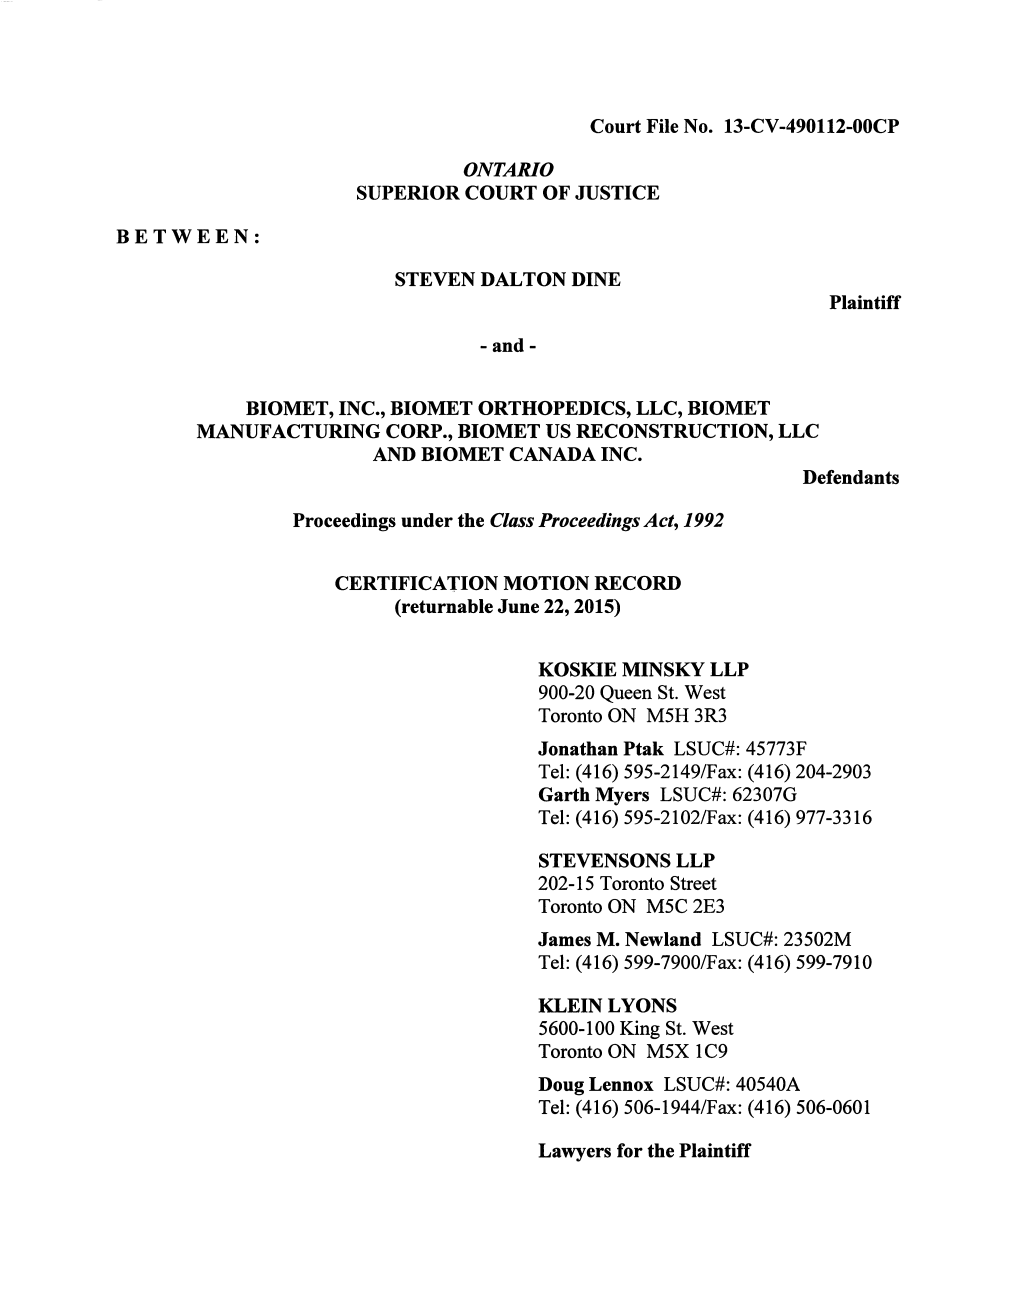 CERTIFICATION MOTION RECORD (Returnable June 22, 2015)